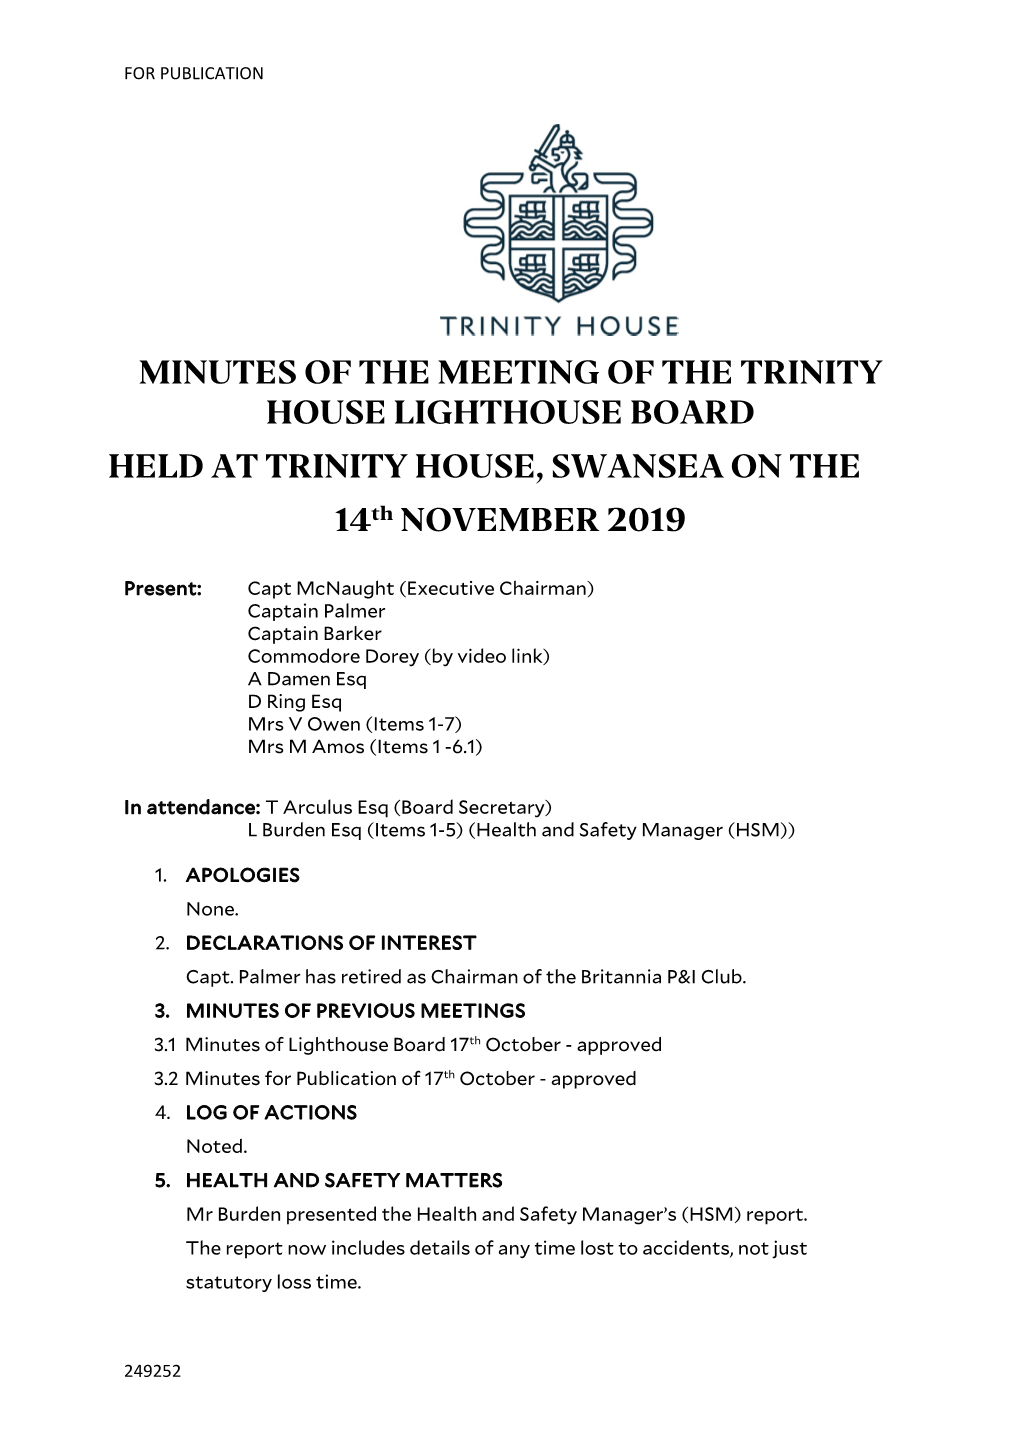 MINUTES of the MEETING of the TRINITY HOUSE LIGHTHOUSE BOARD HELD at TRINITY HOUSE, SWANSEA on the 14Th NOVEMBER 2019